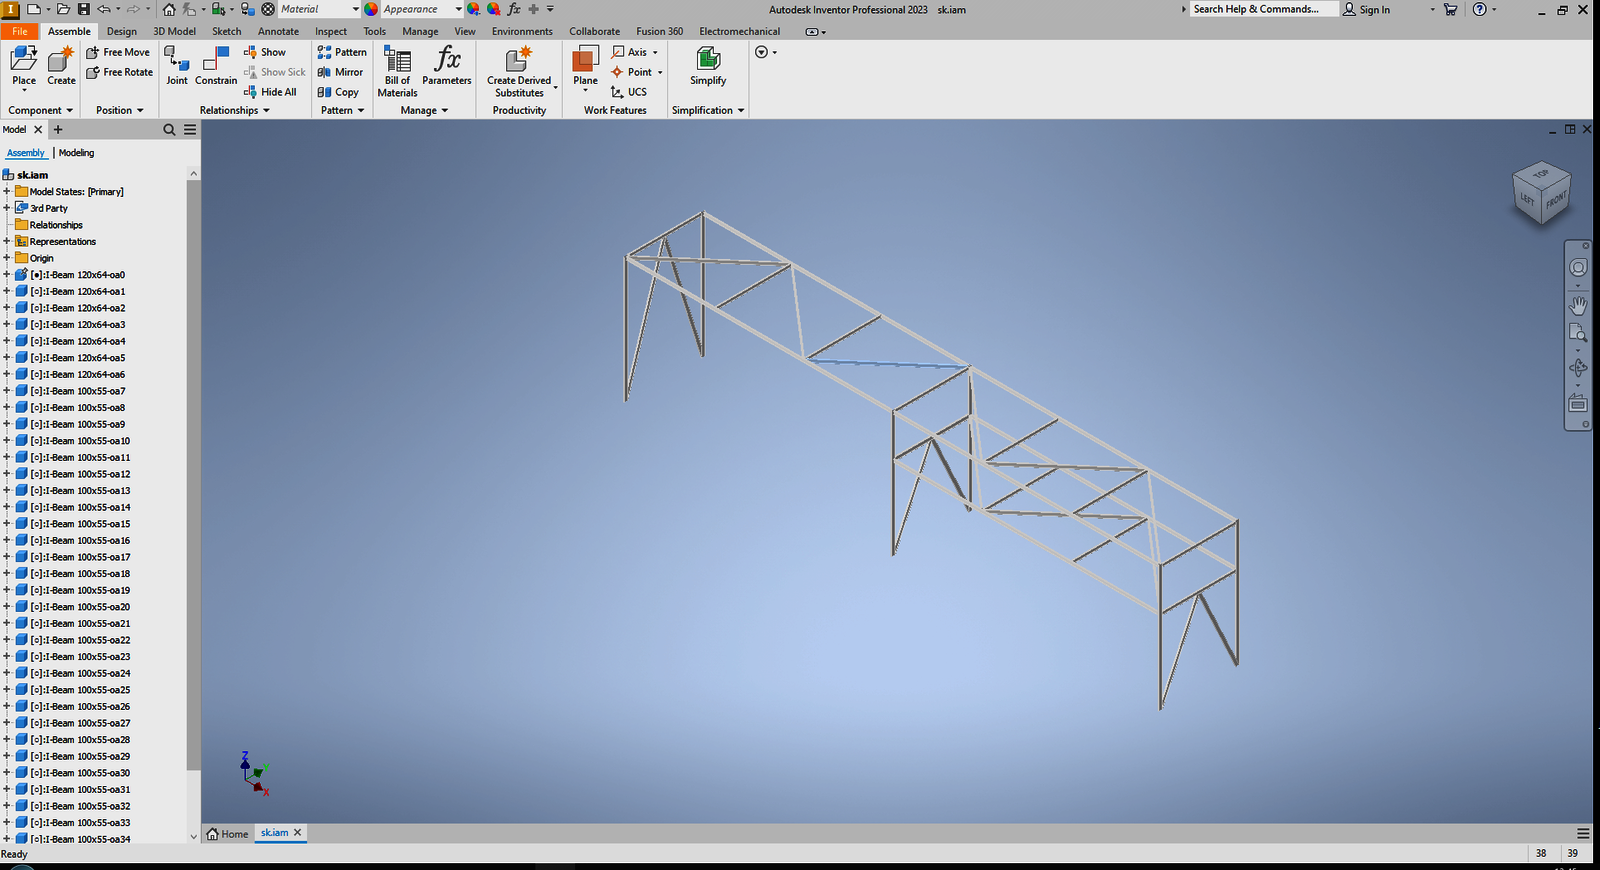 Structural Steel Model created in Autodesk Inventor 2023